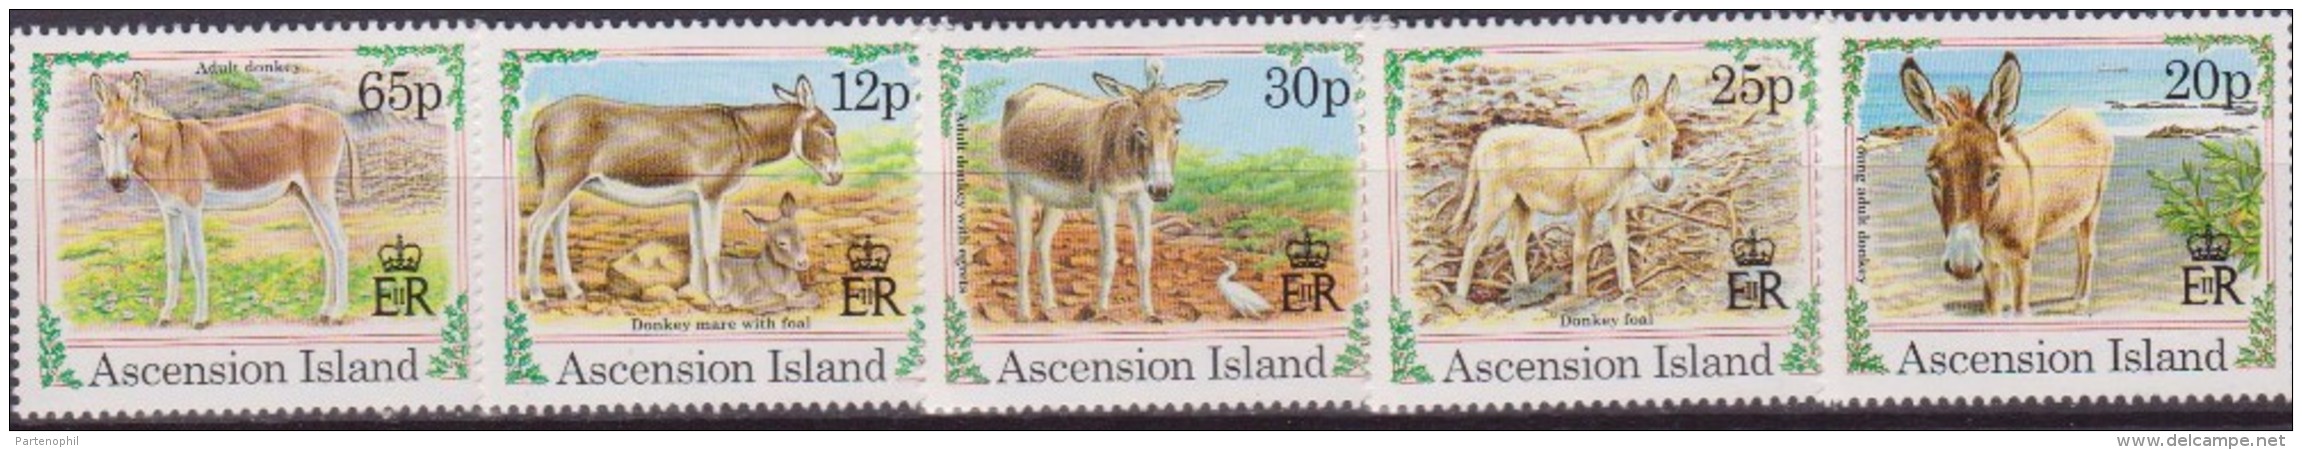 ASCENSION IS. DONKEY ASINI 618/22 MNH - Anes